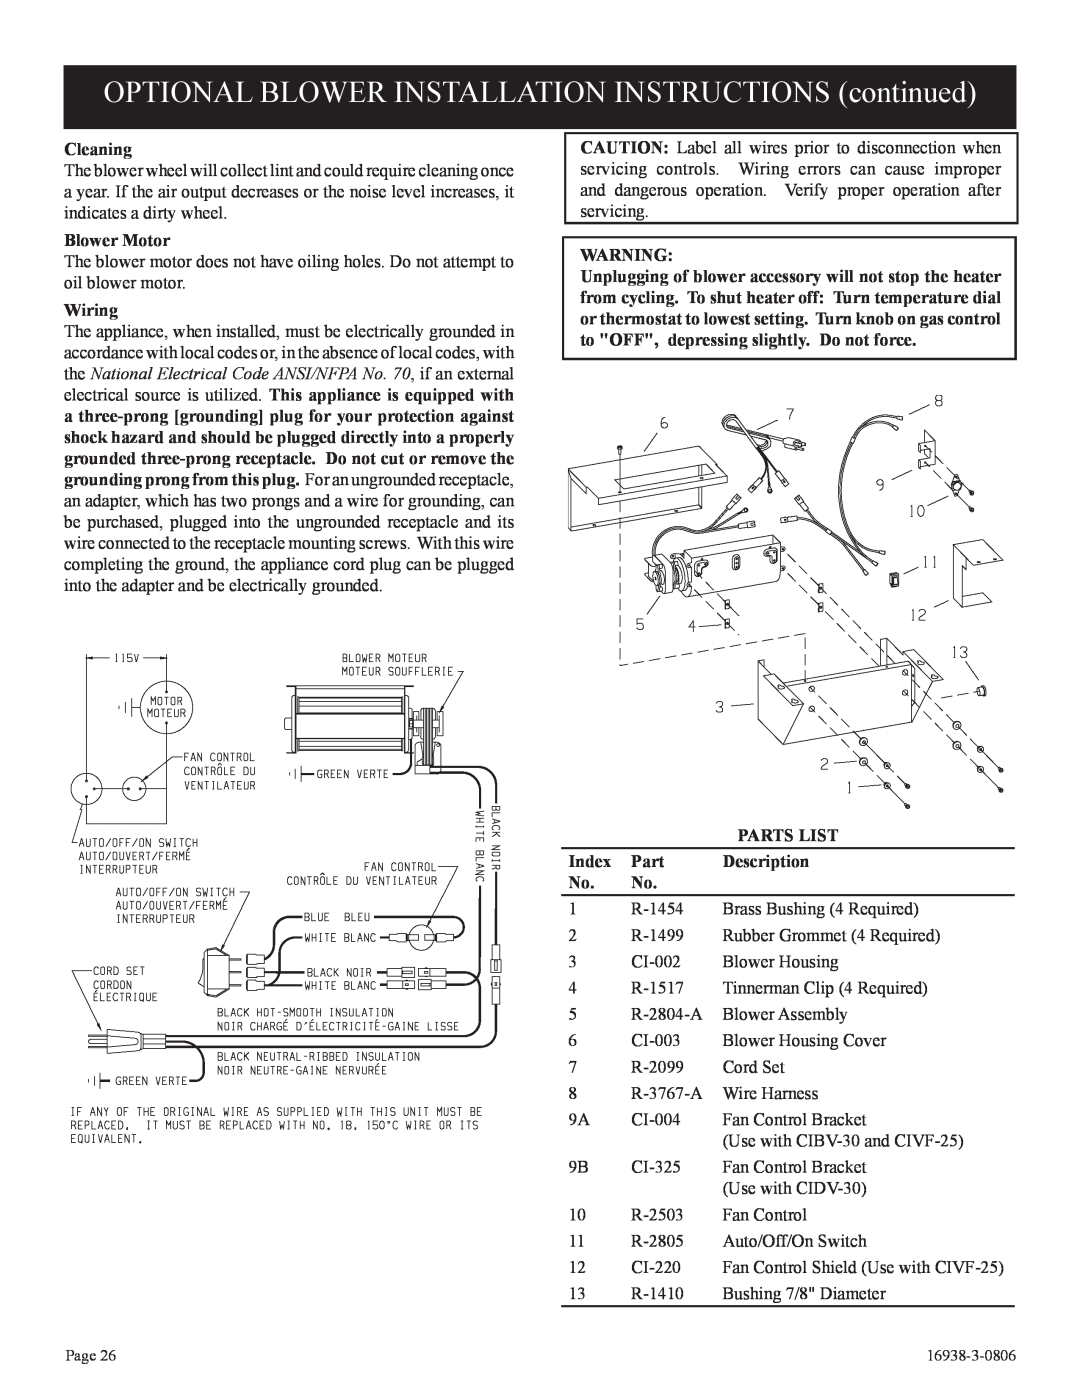 Empire Comfort Systems CIVF-25-21 installation instructions Cleaning, Blower Motor, Wiring, Parts List, Index, Description 